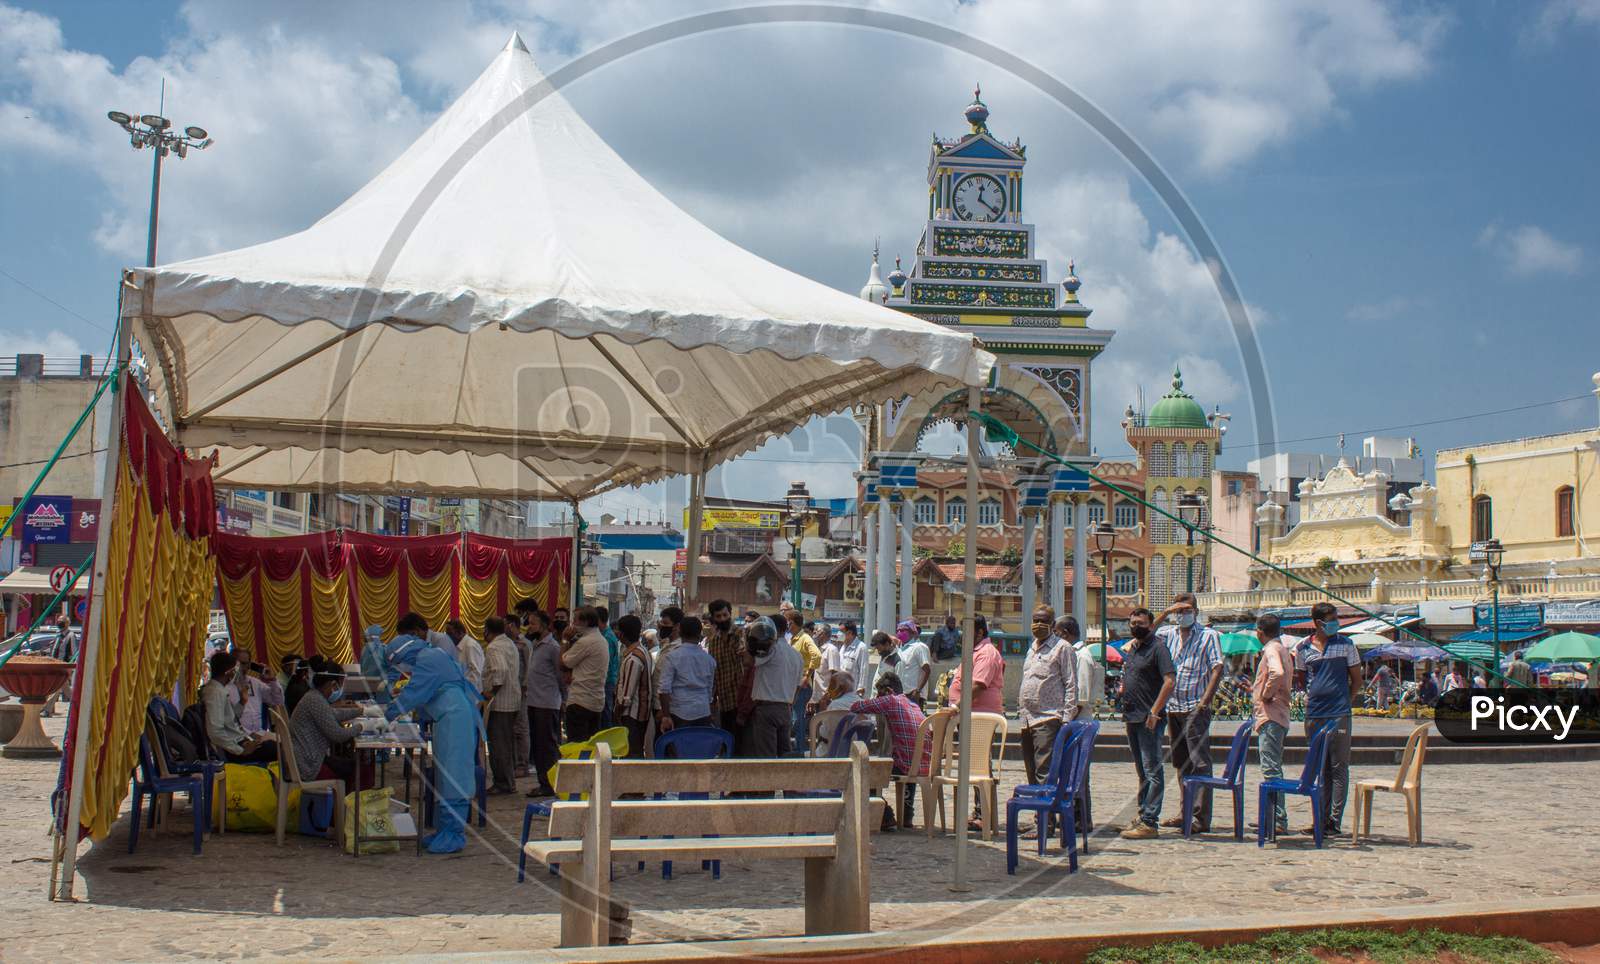 A Covid 19 Testing Tent is erected in the heart of Mysuru city to facilitate the Public due to the Spiking  of Corona cases in Karnataka/India.